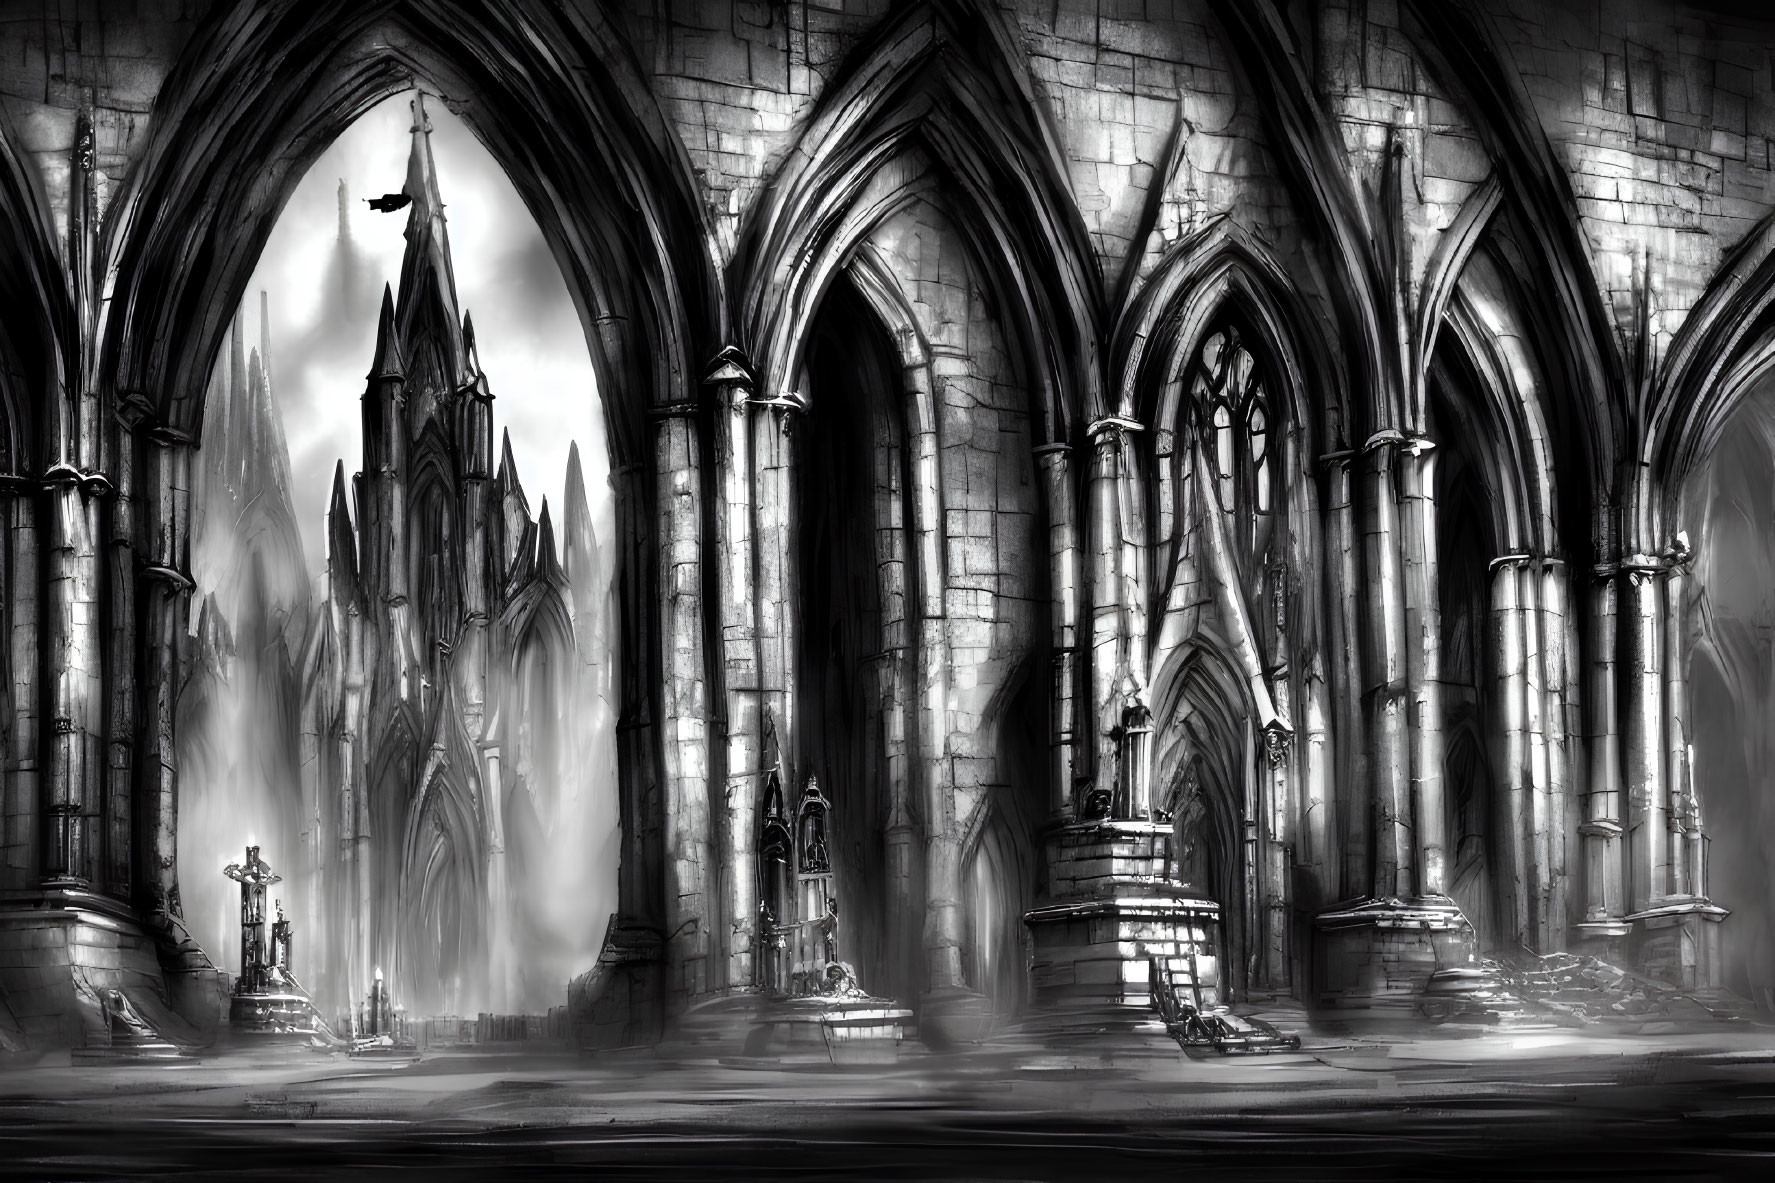 Detailed monochrome sketch of gothic cathedral interior with towering arches and figure at altar